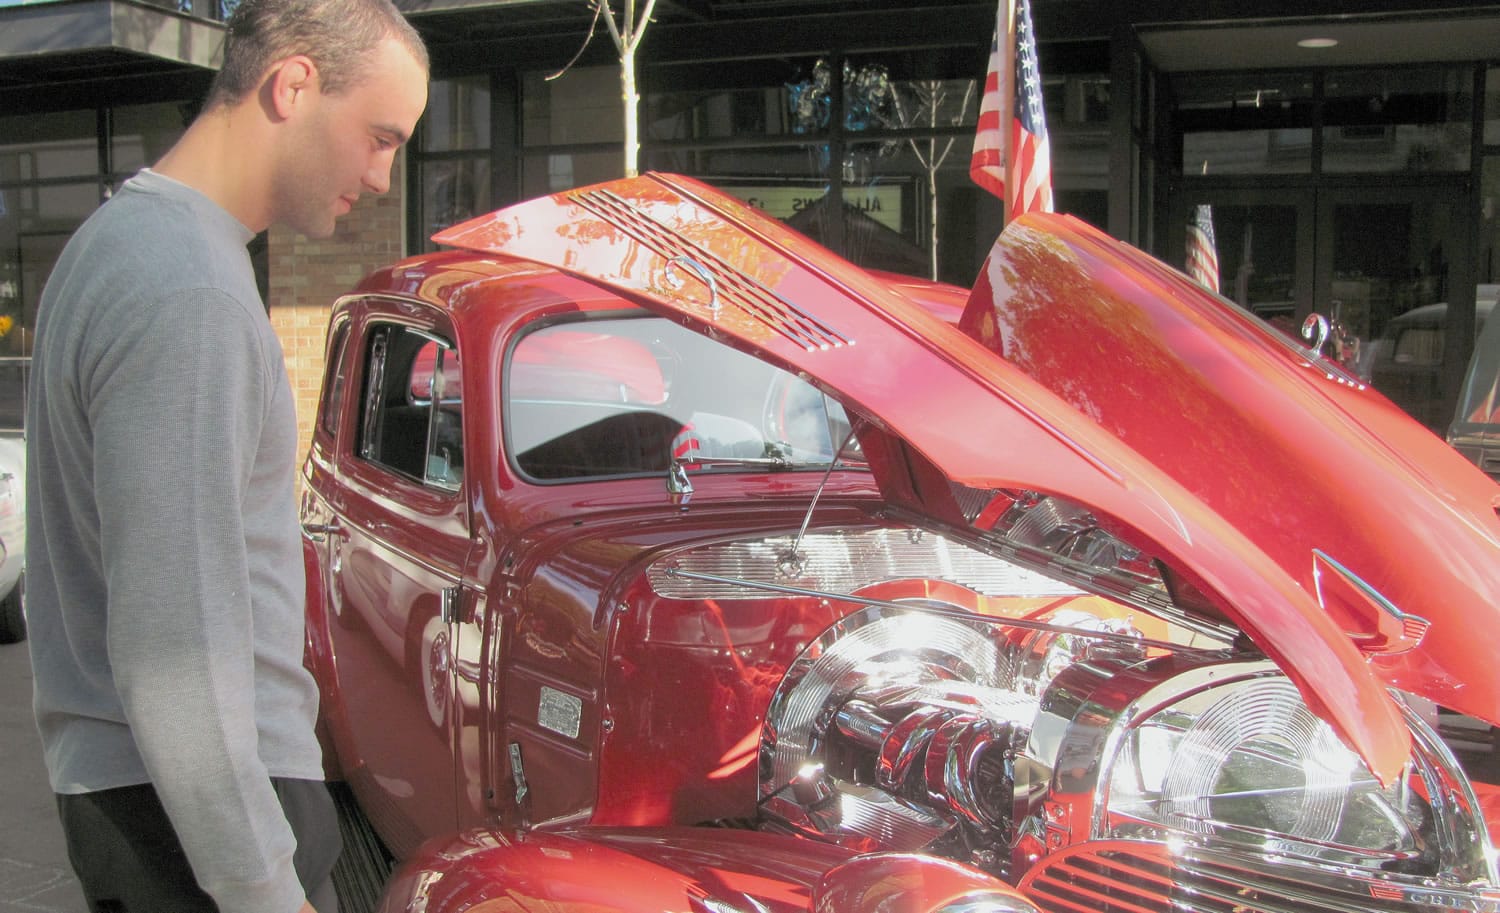 Garrett Erickson of Camas checks out one of the many vehicles on display at the Braggers Rights Classic Car Show, sponsored by Georgia Pacific.